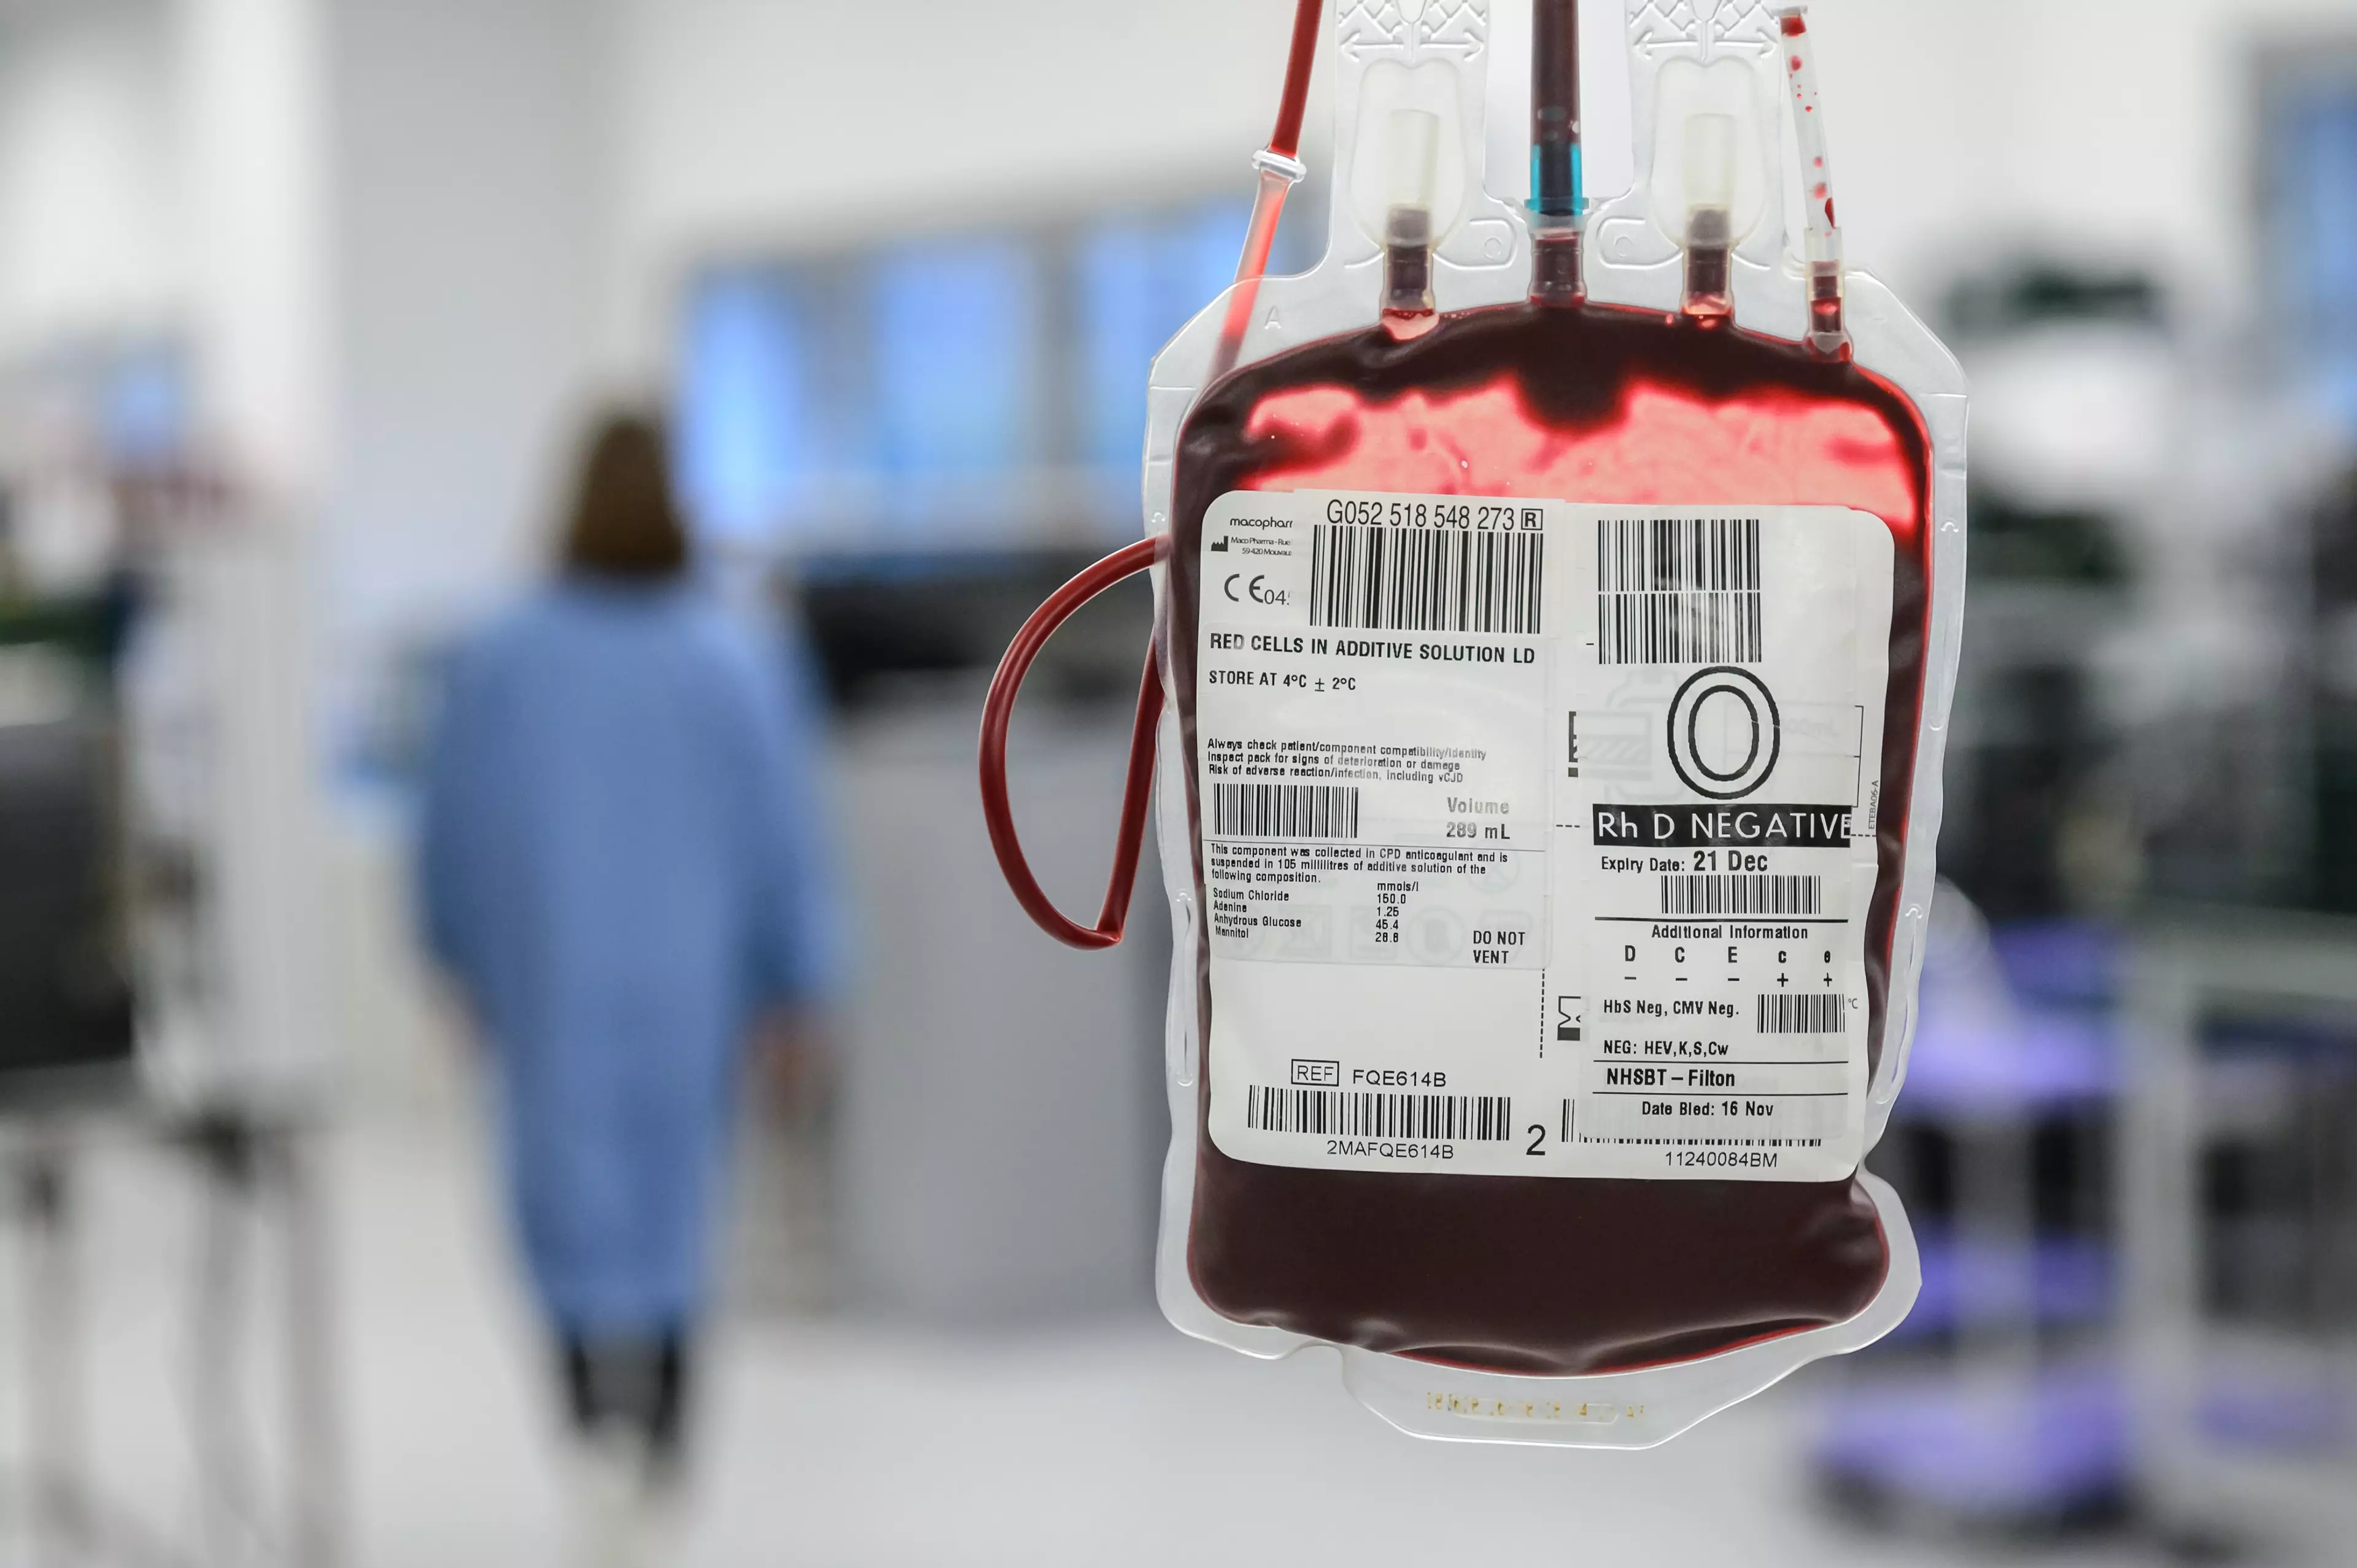 The NHS needs 400 new donors a day to meet demand.